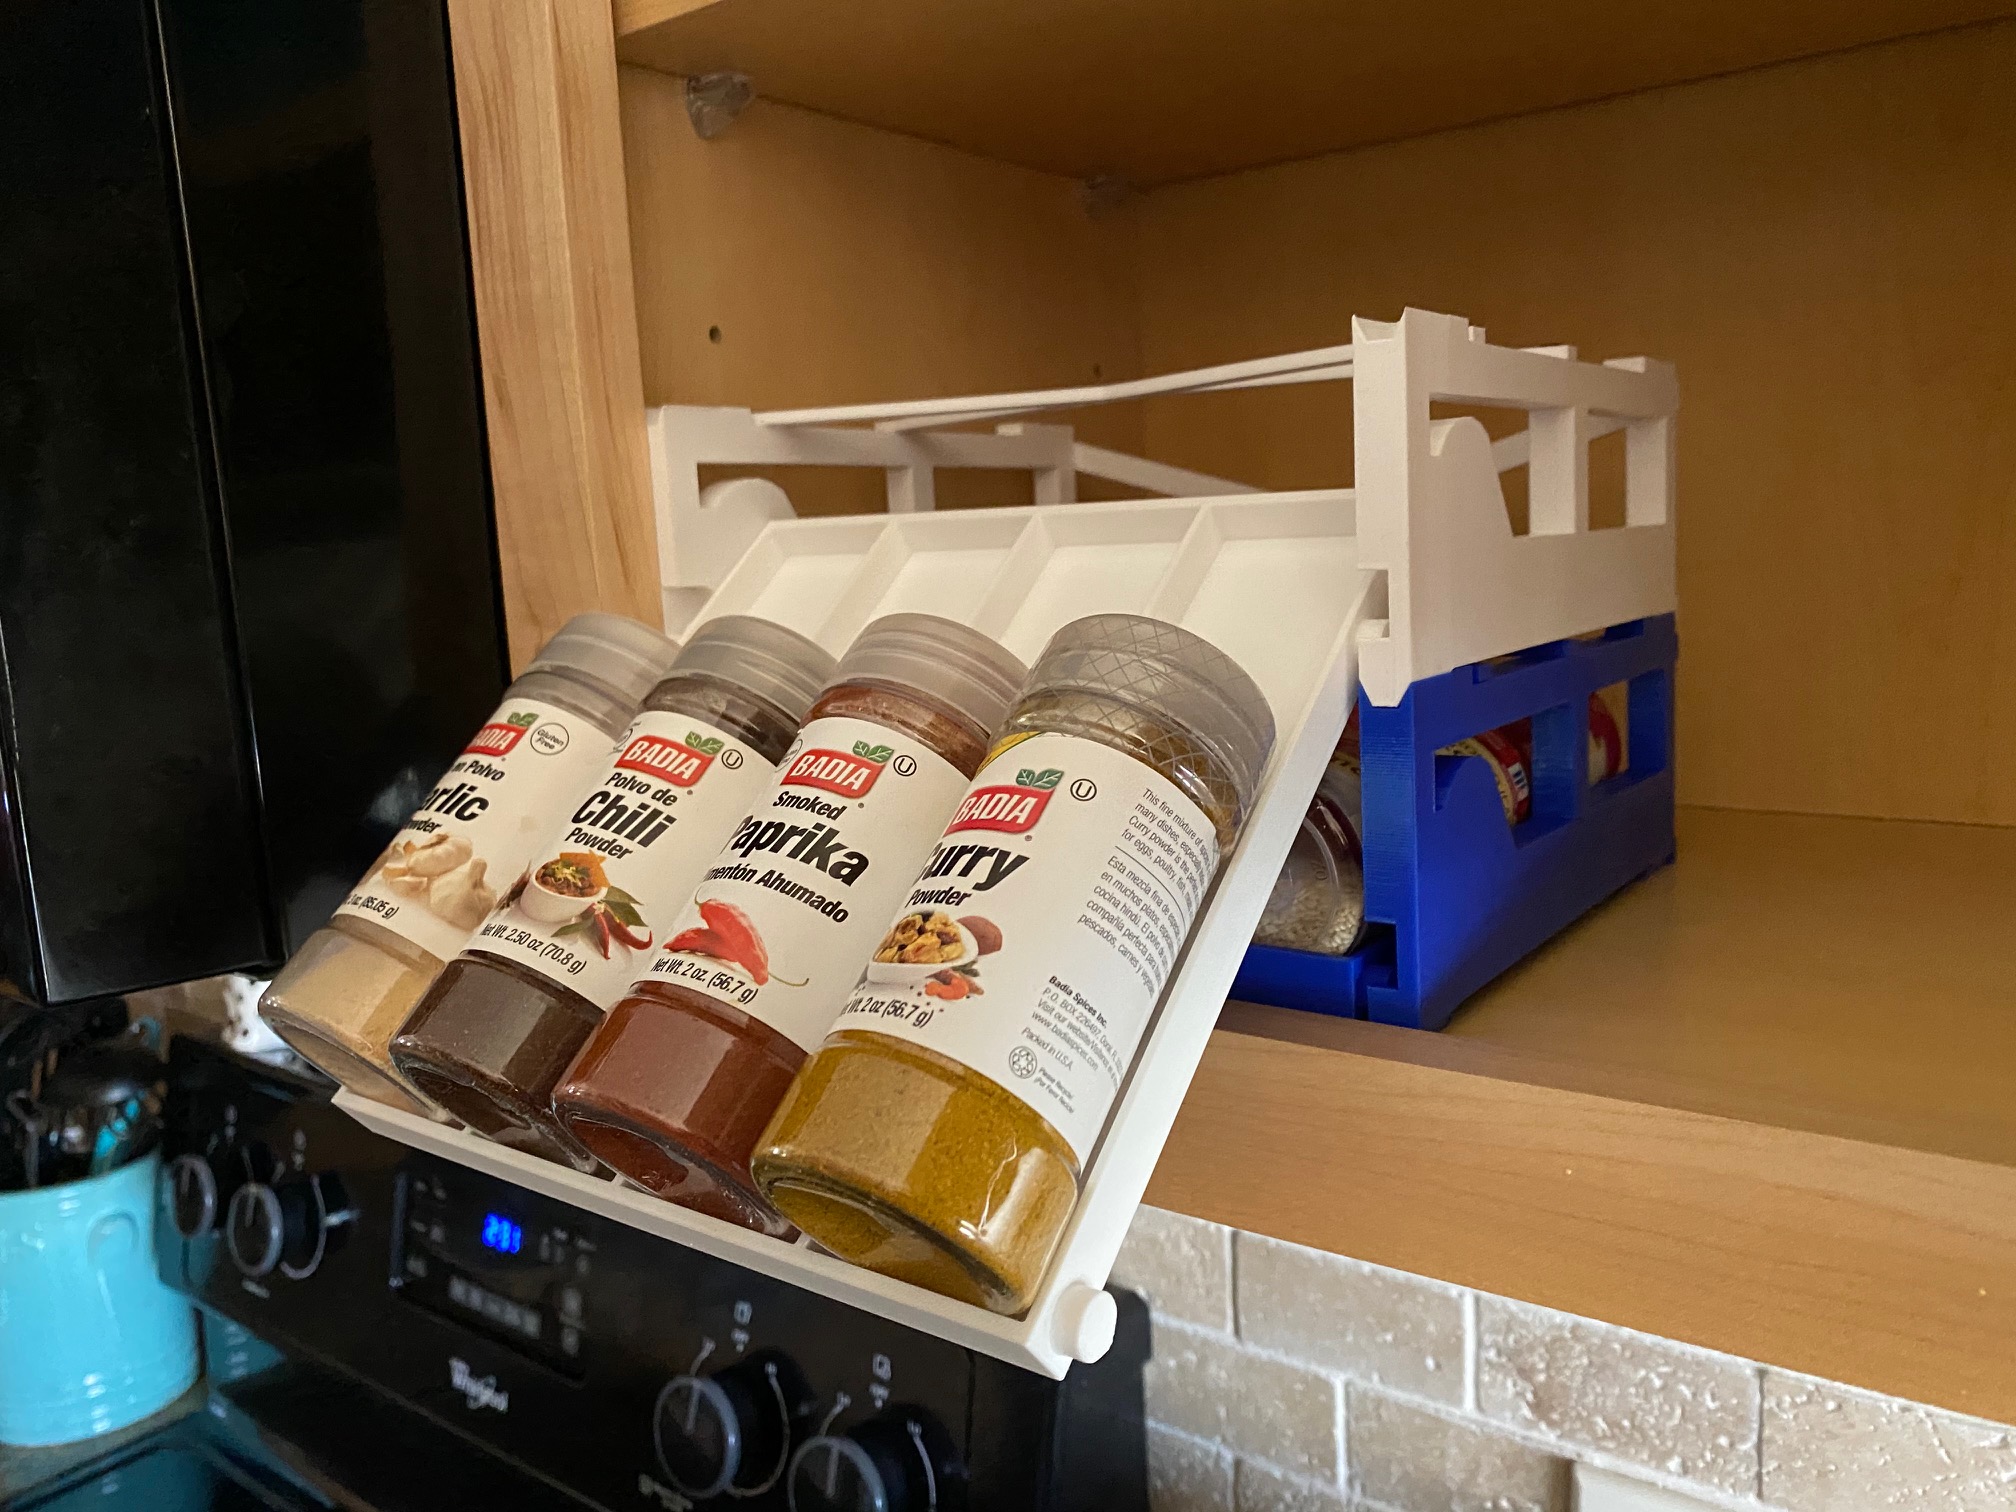 Stackable Spice Rack